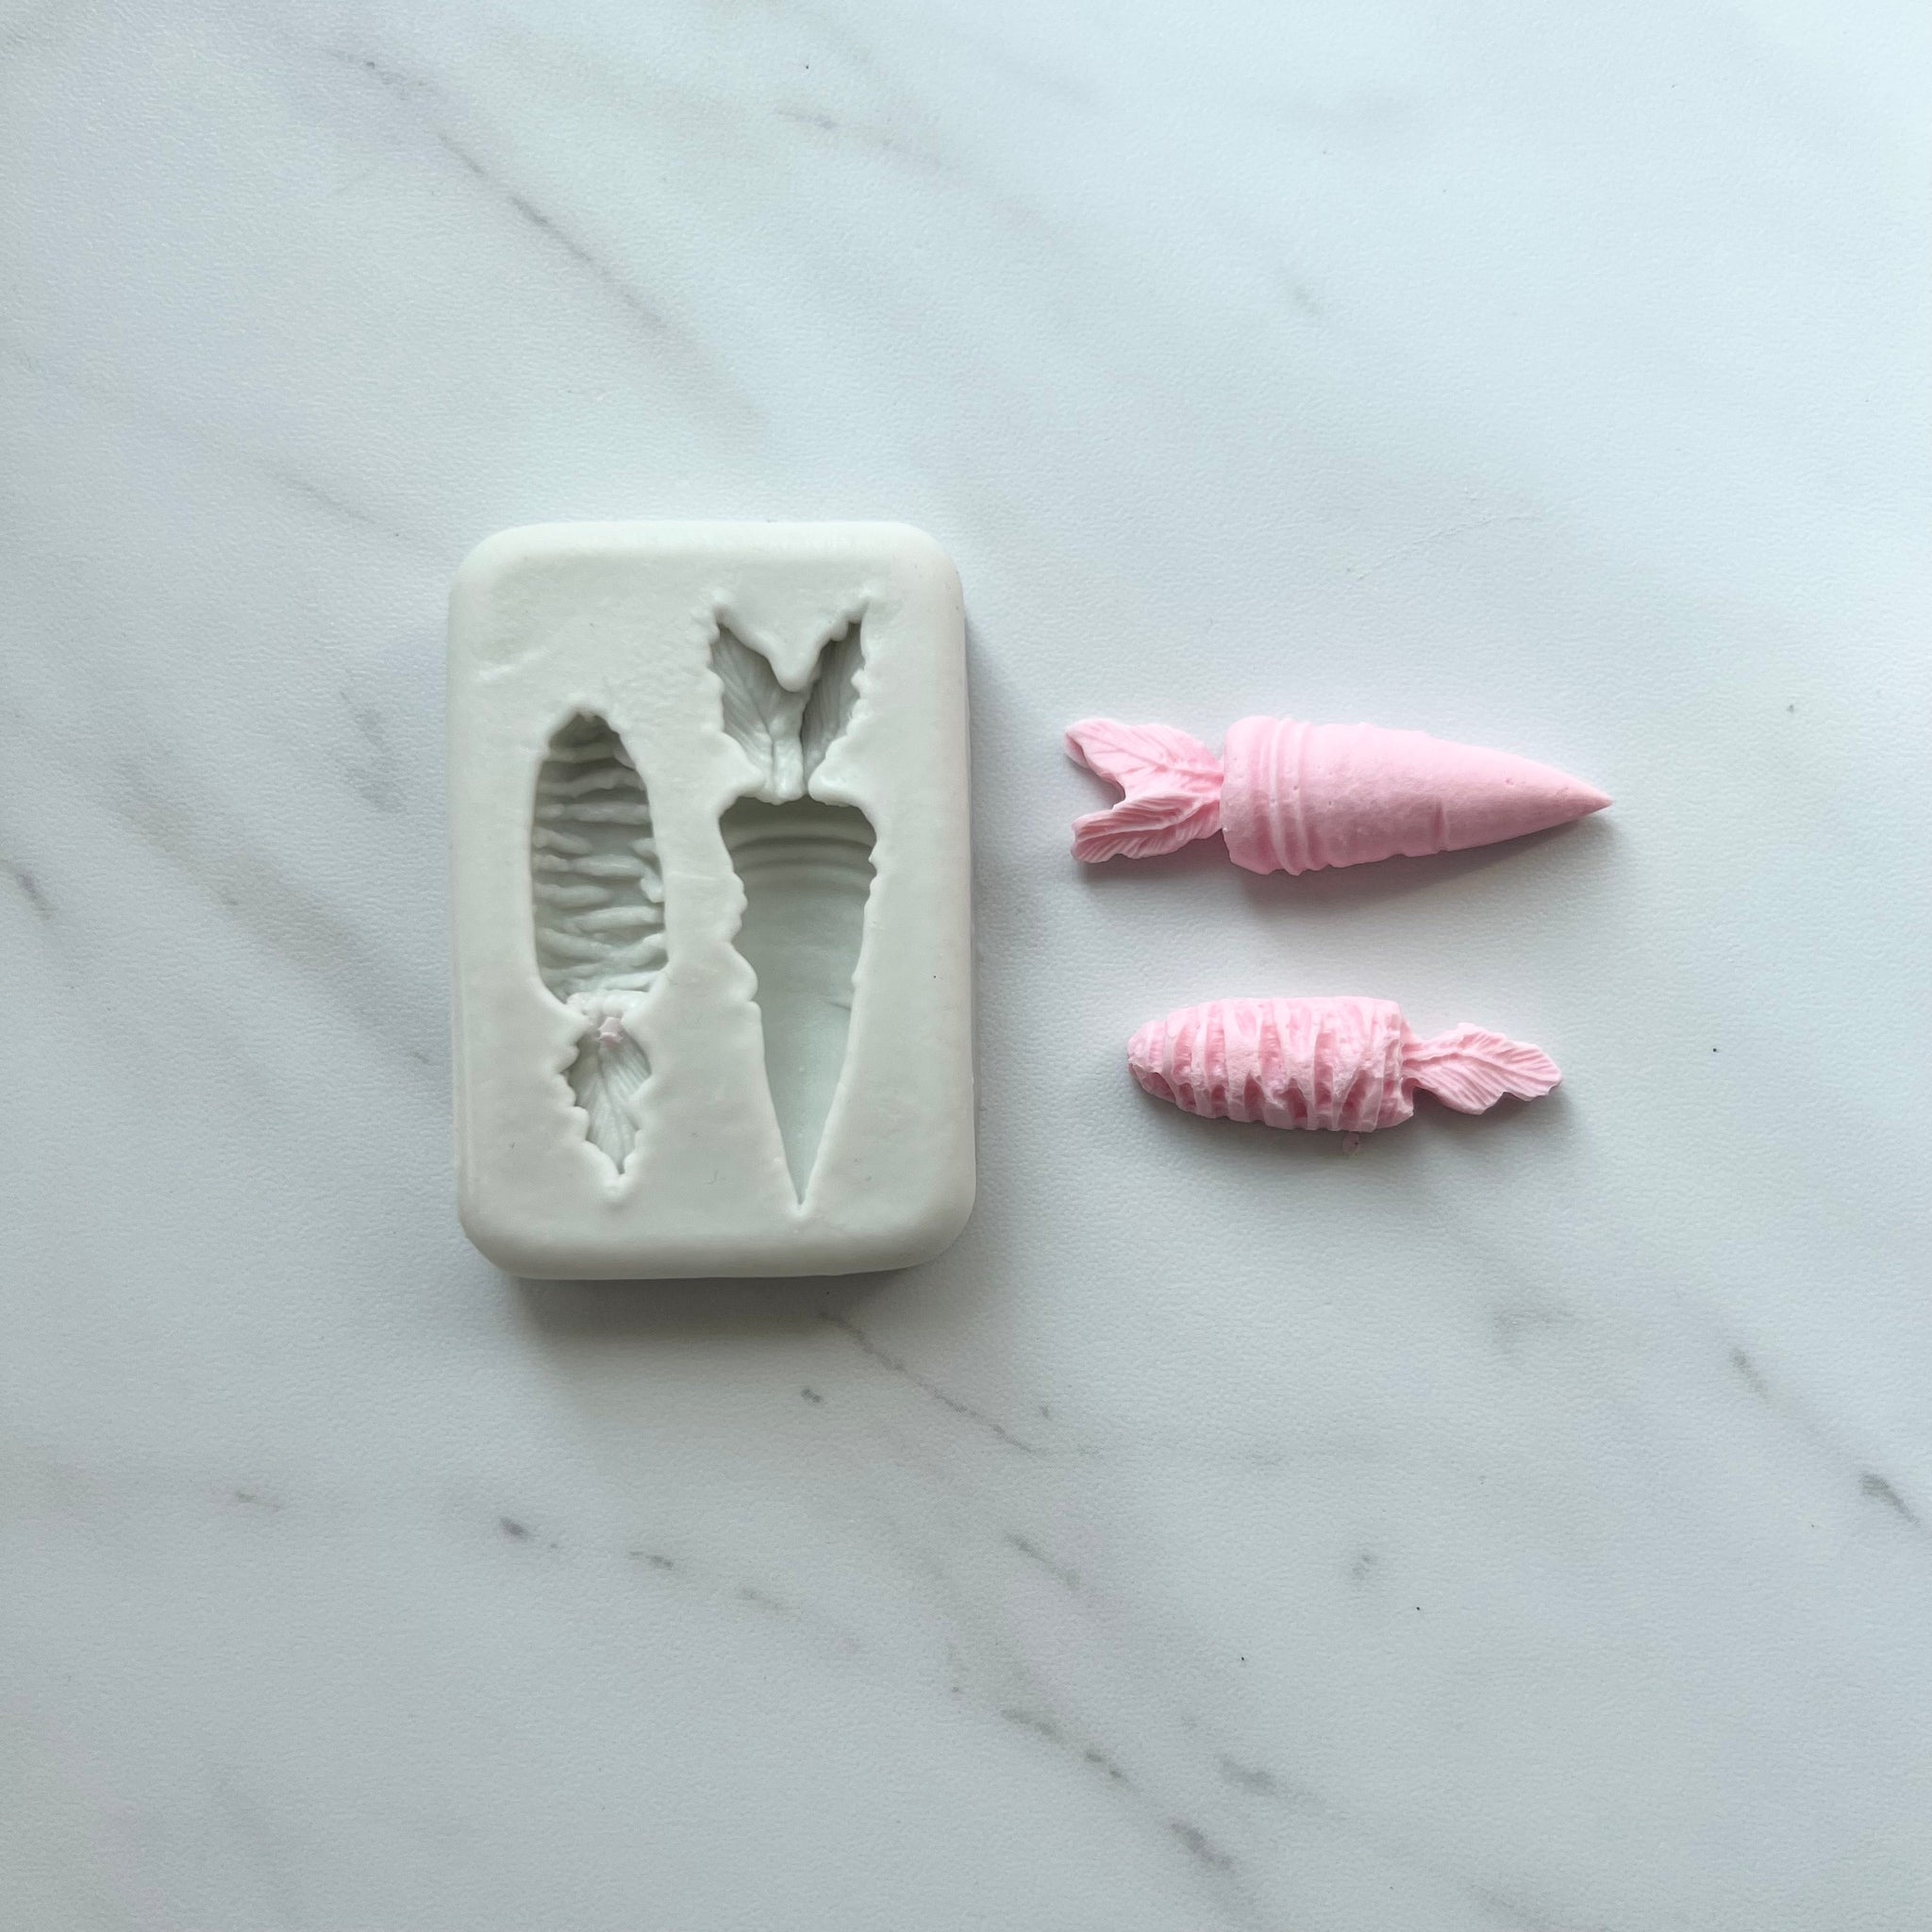 CARROT DUO MOLD